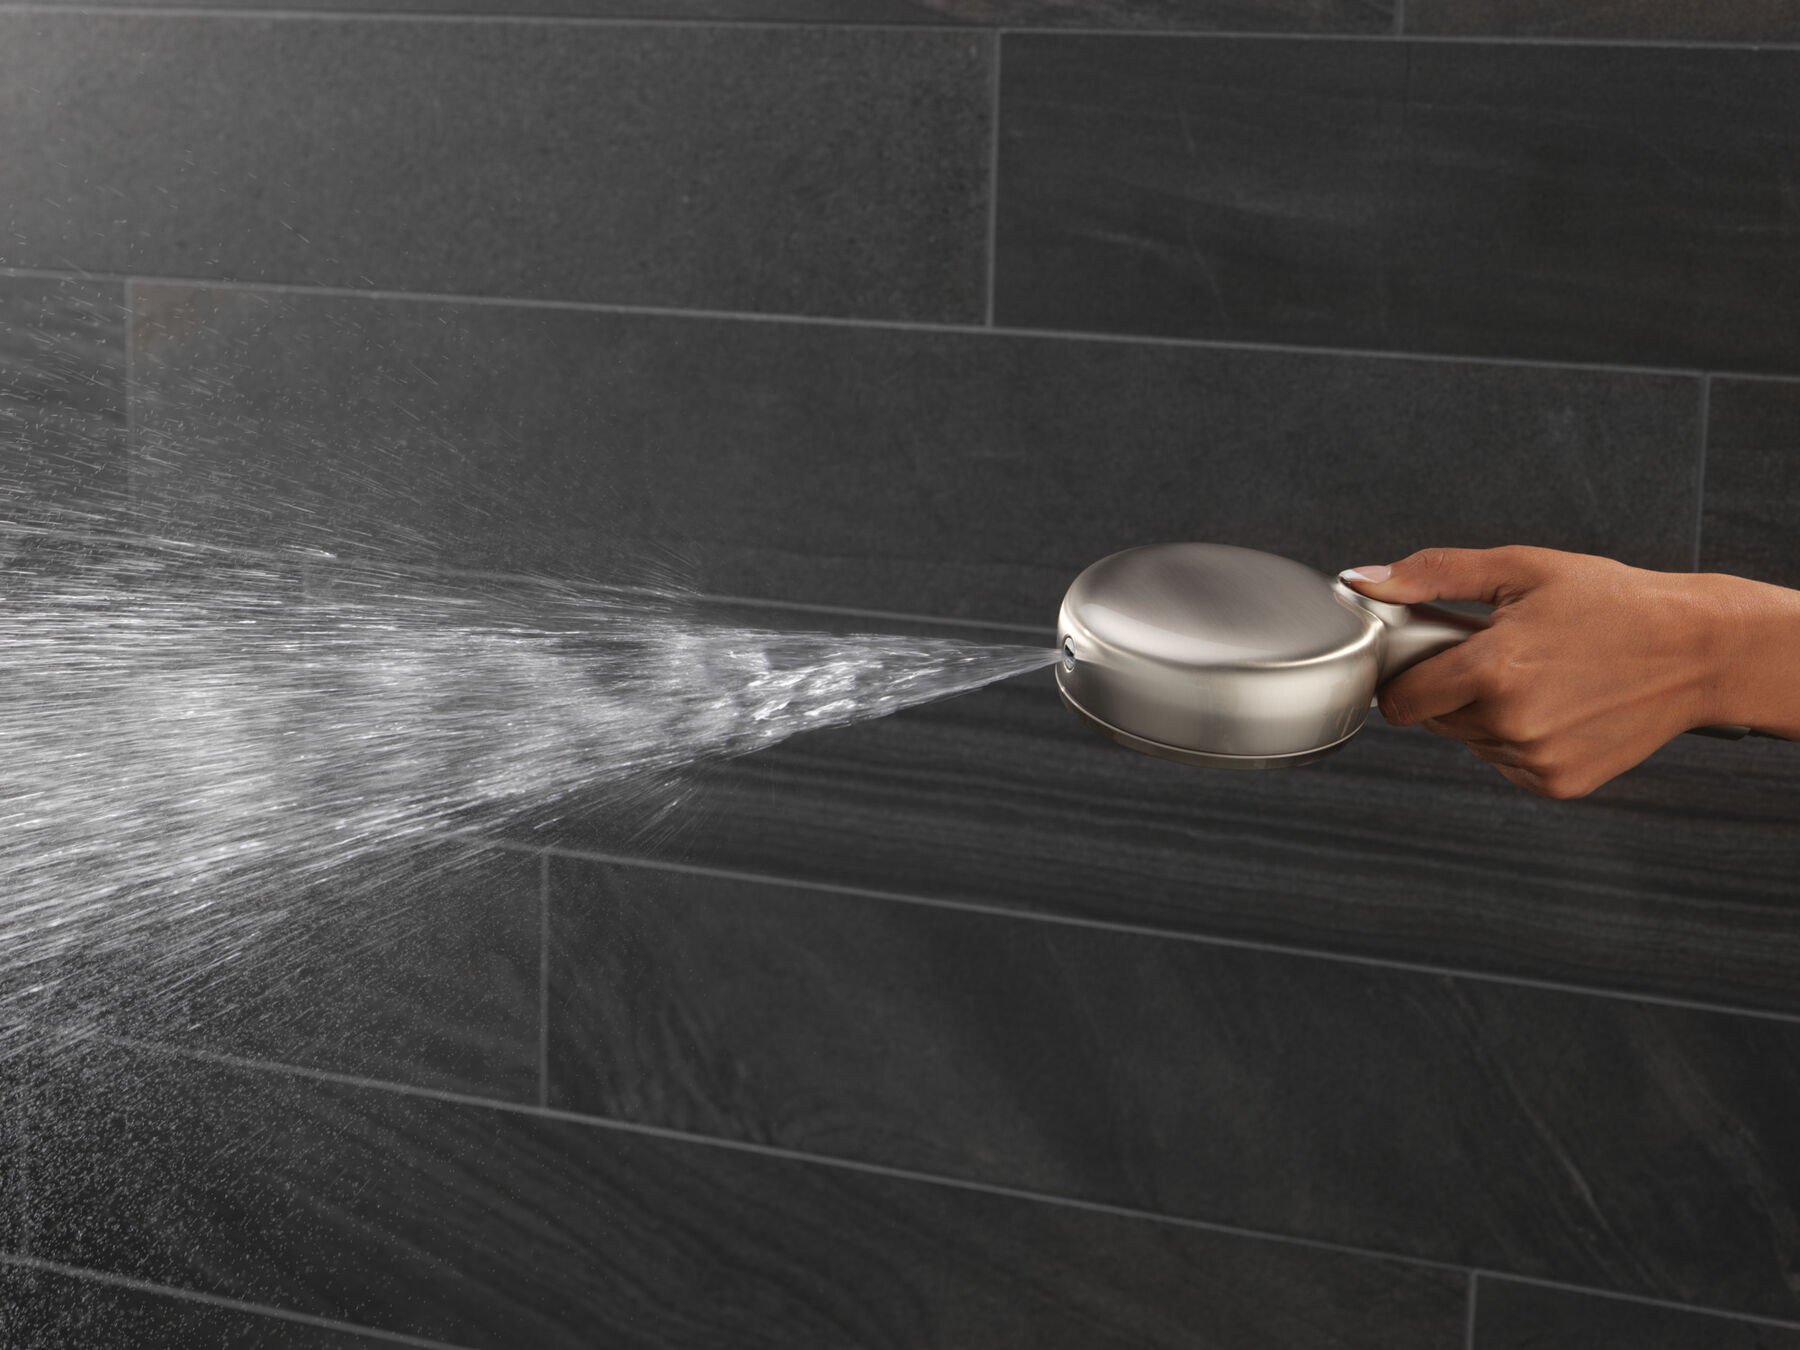 6-Setting Hand Shower with Cleaning Spray in Spotshield Brushed